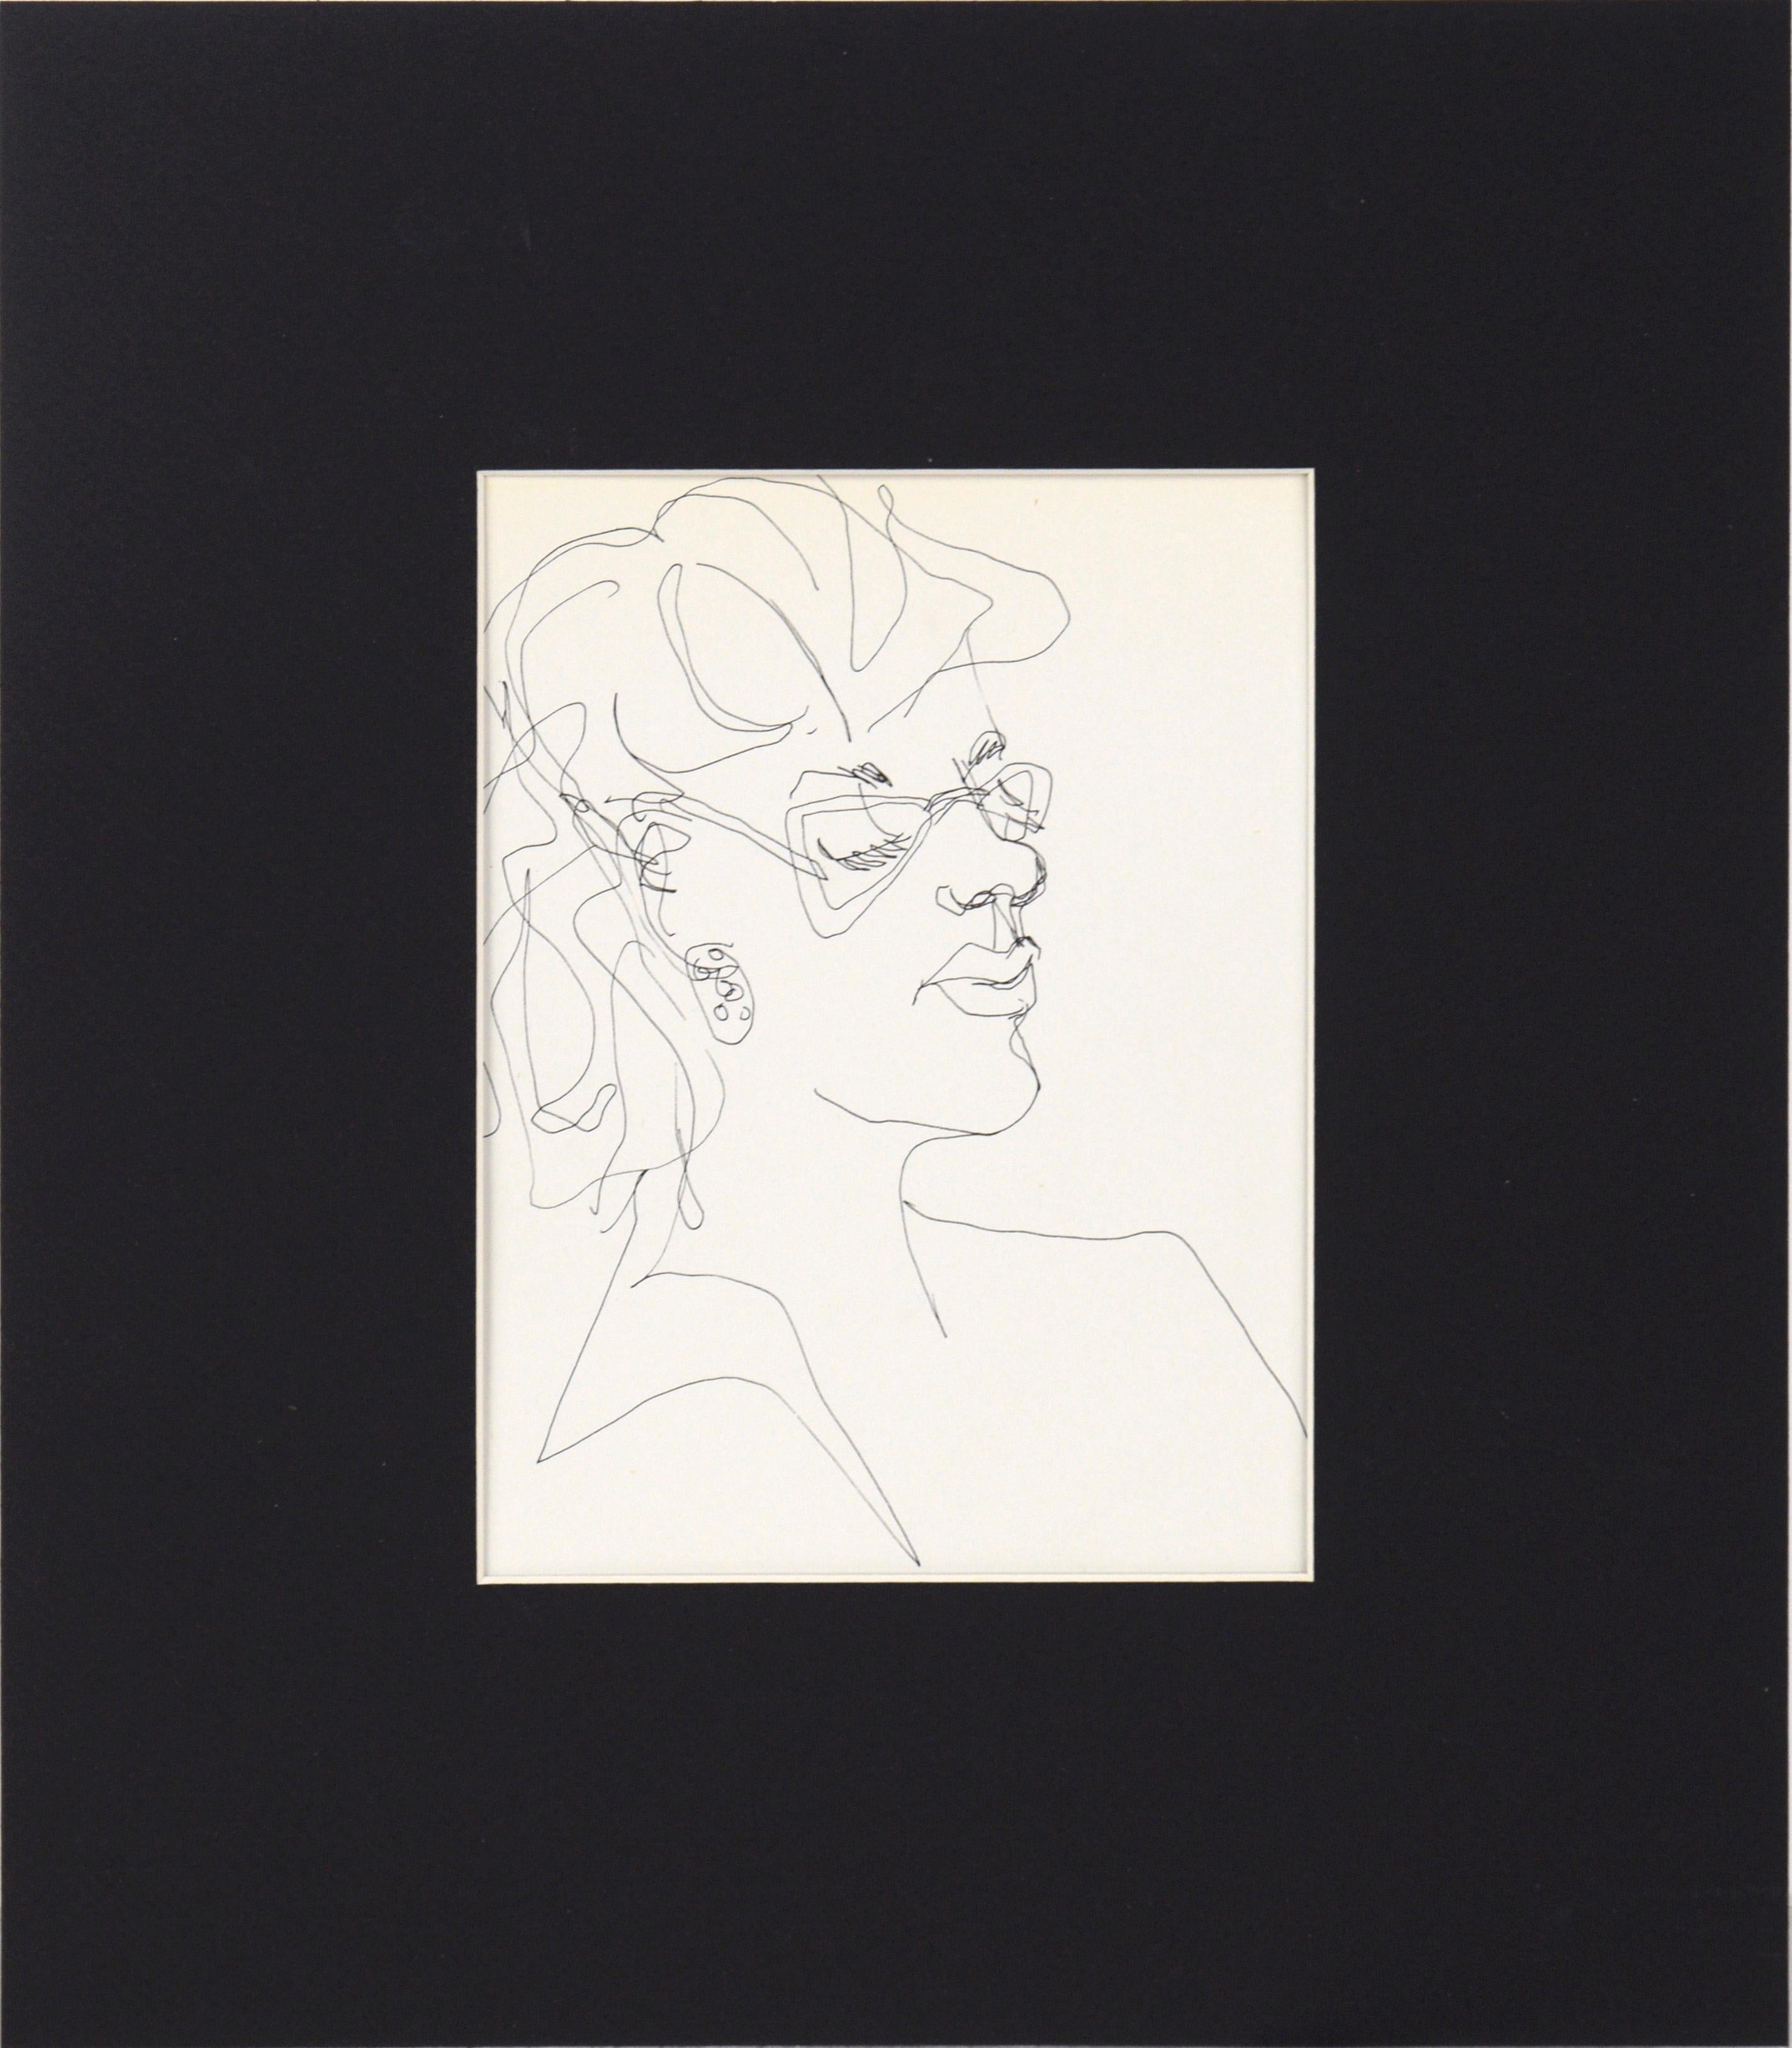 Portrait of a Woman with Glasses - Drawing in Pen on Paper - Art by Unknown